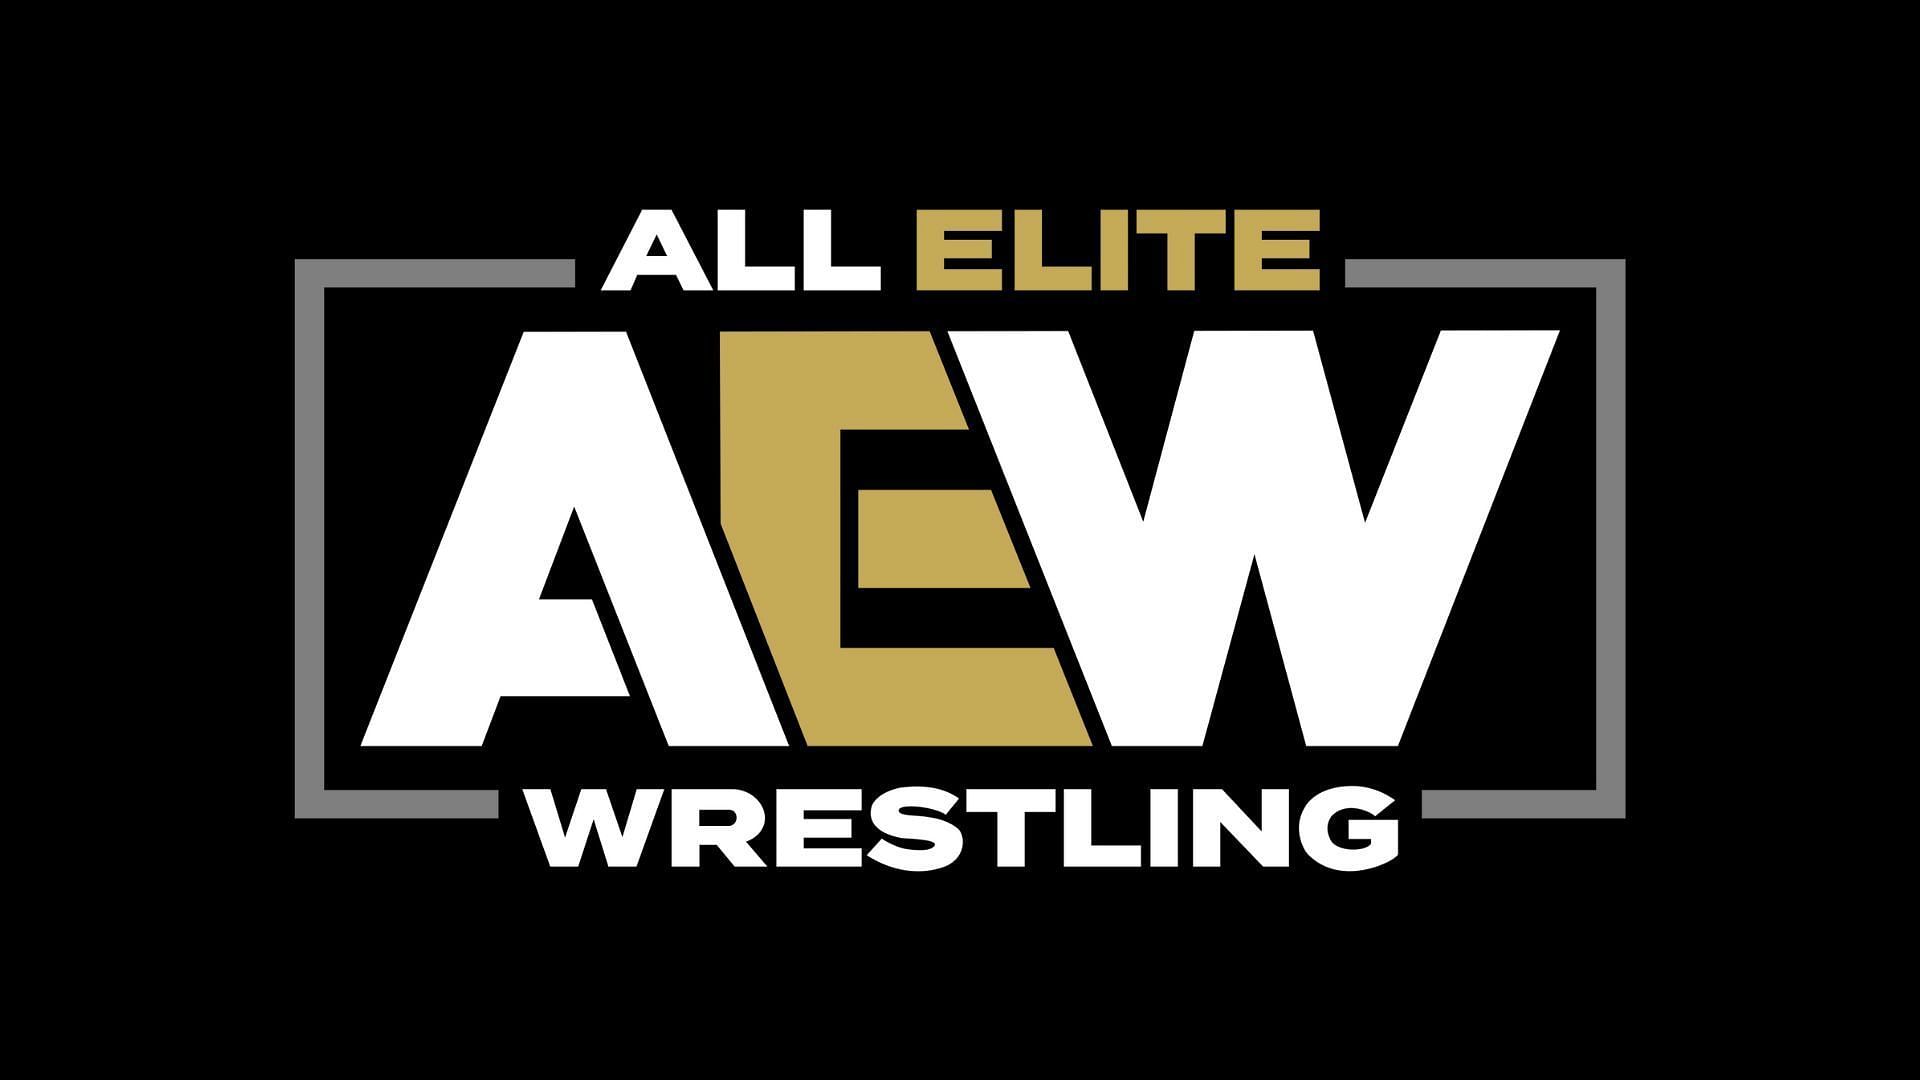 AEW star has thanked Zac Efron for saving him